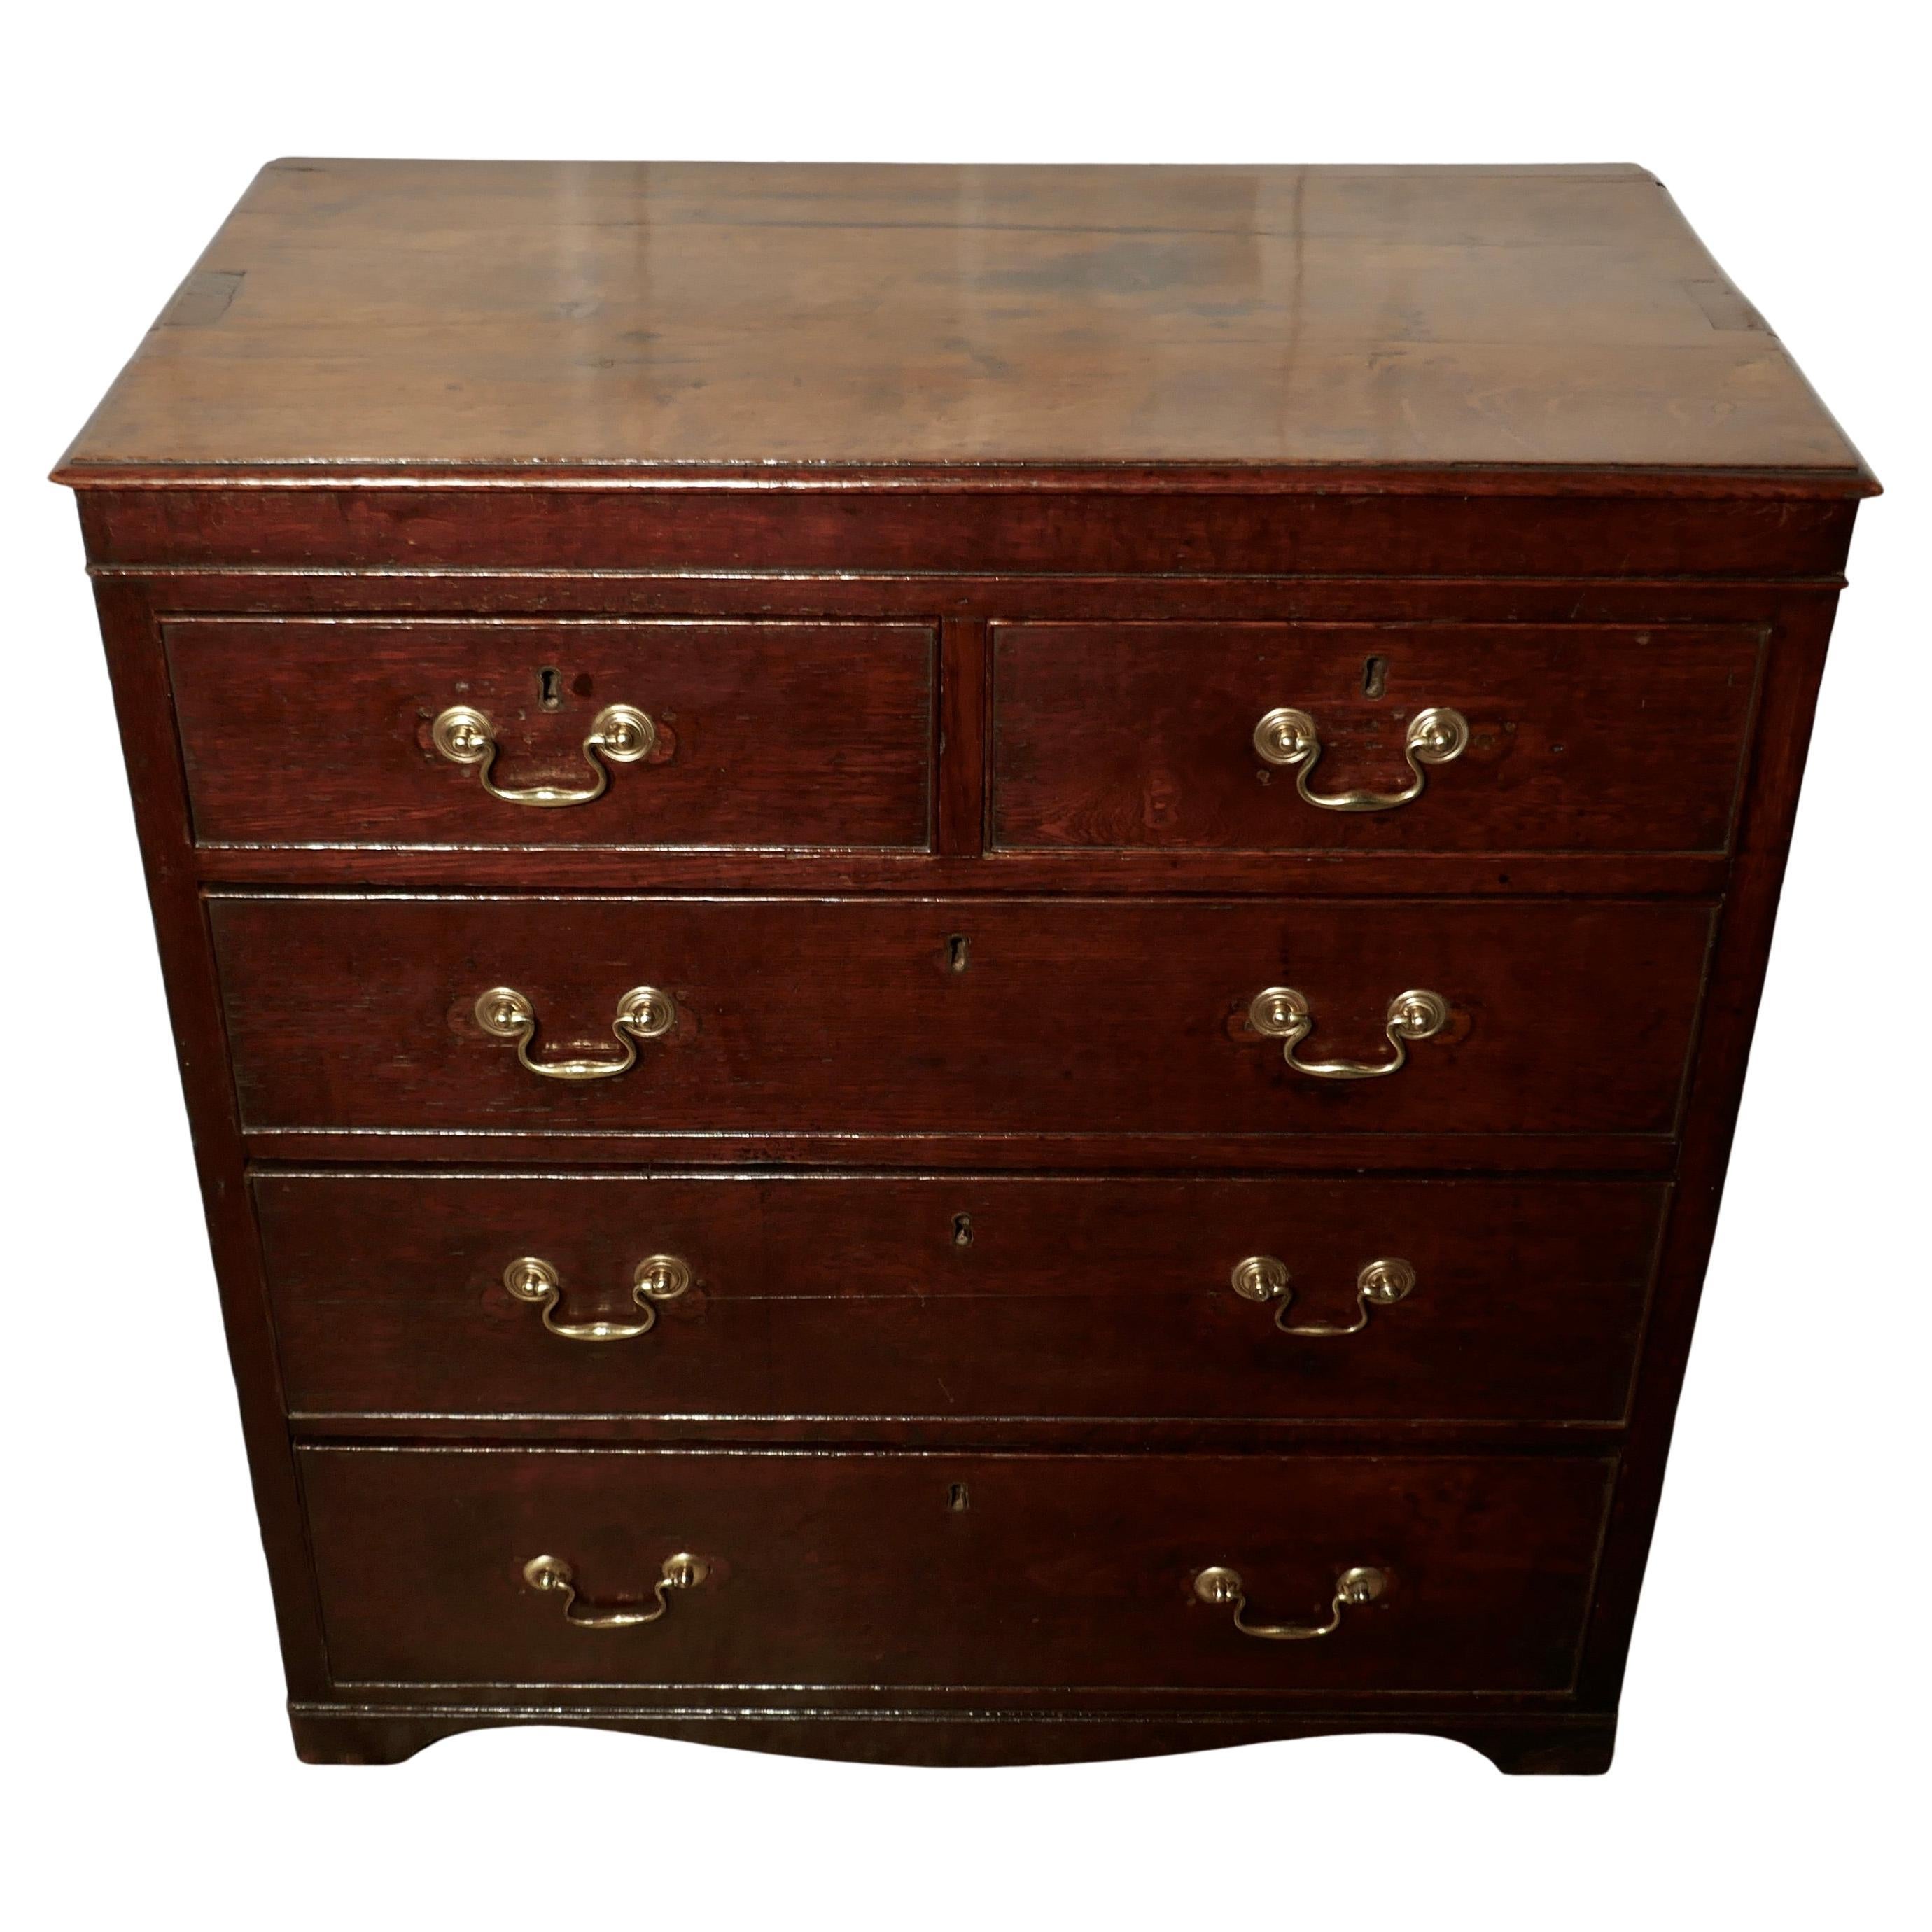 Period Oak Chest of Drawers This Charming Old Oak Georgian Chest of Drawers For Sale